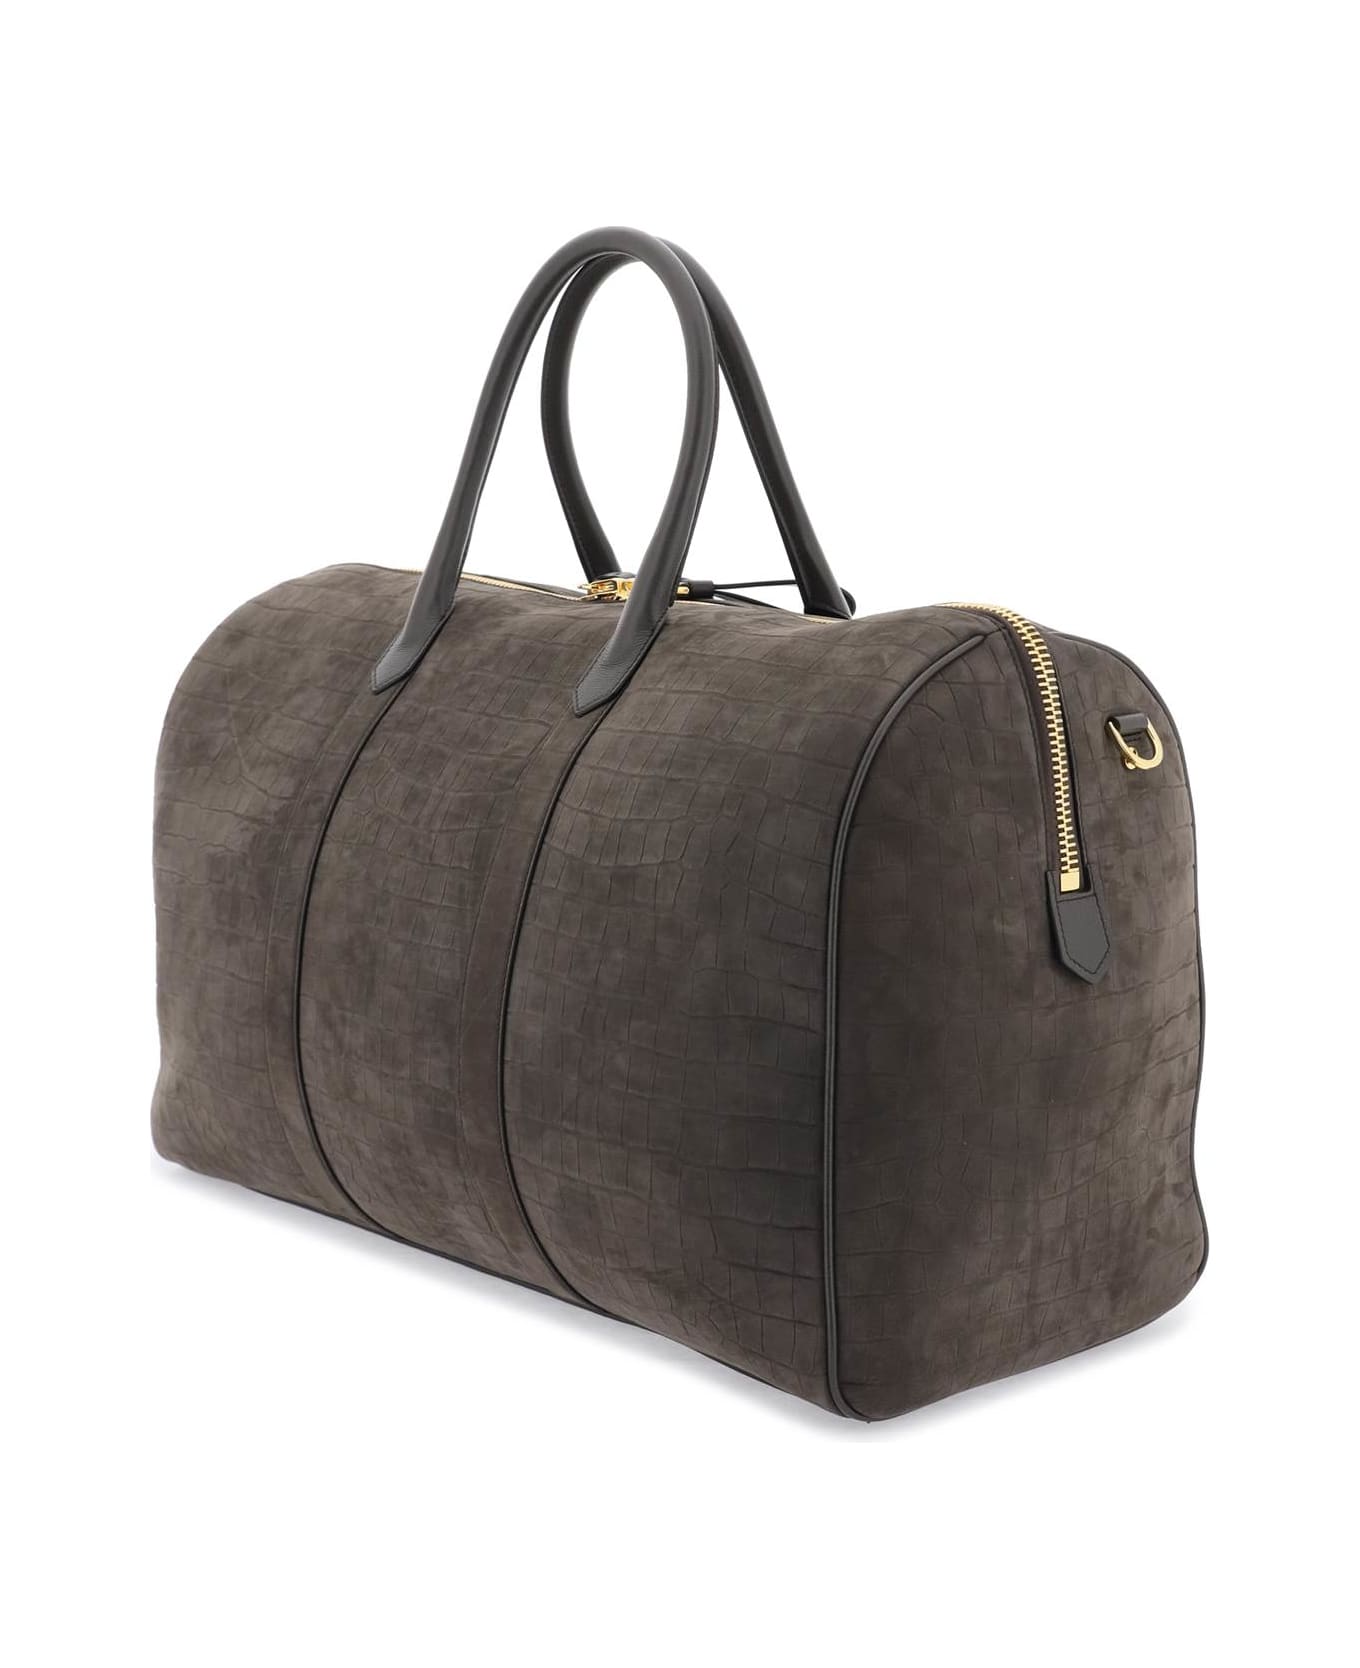 Tom Ford Suede Duffle Bag - FANGO (Brown) トラベルバッグ